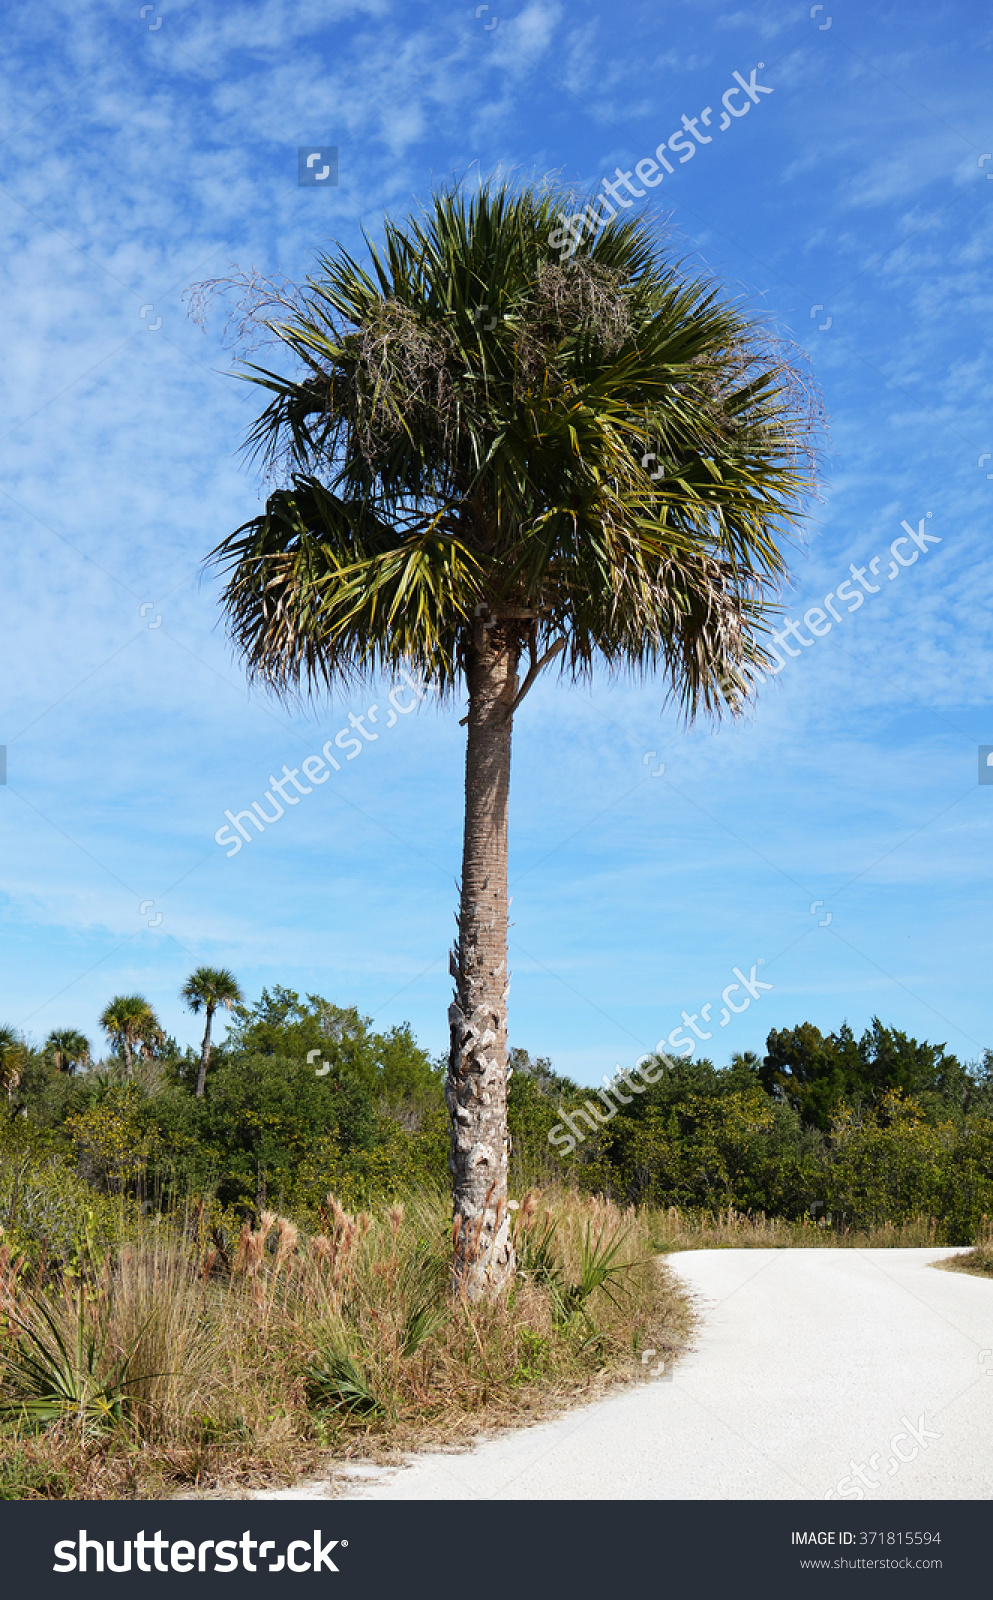 Palm Tree By A Dirt Road At The Wild Life Refuge In Cape Canaveral.